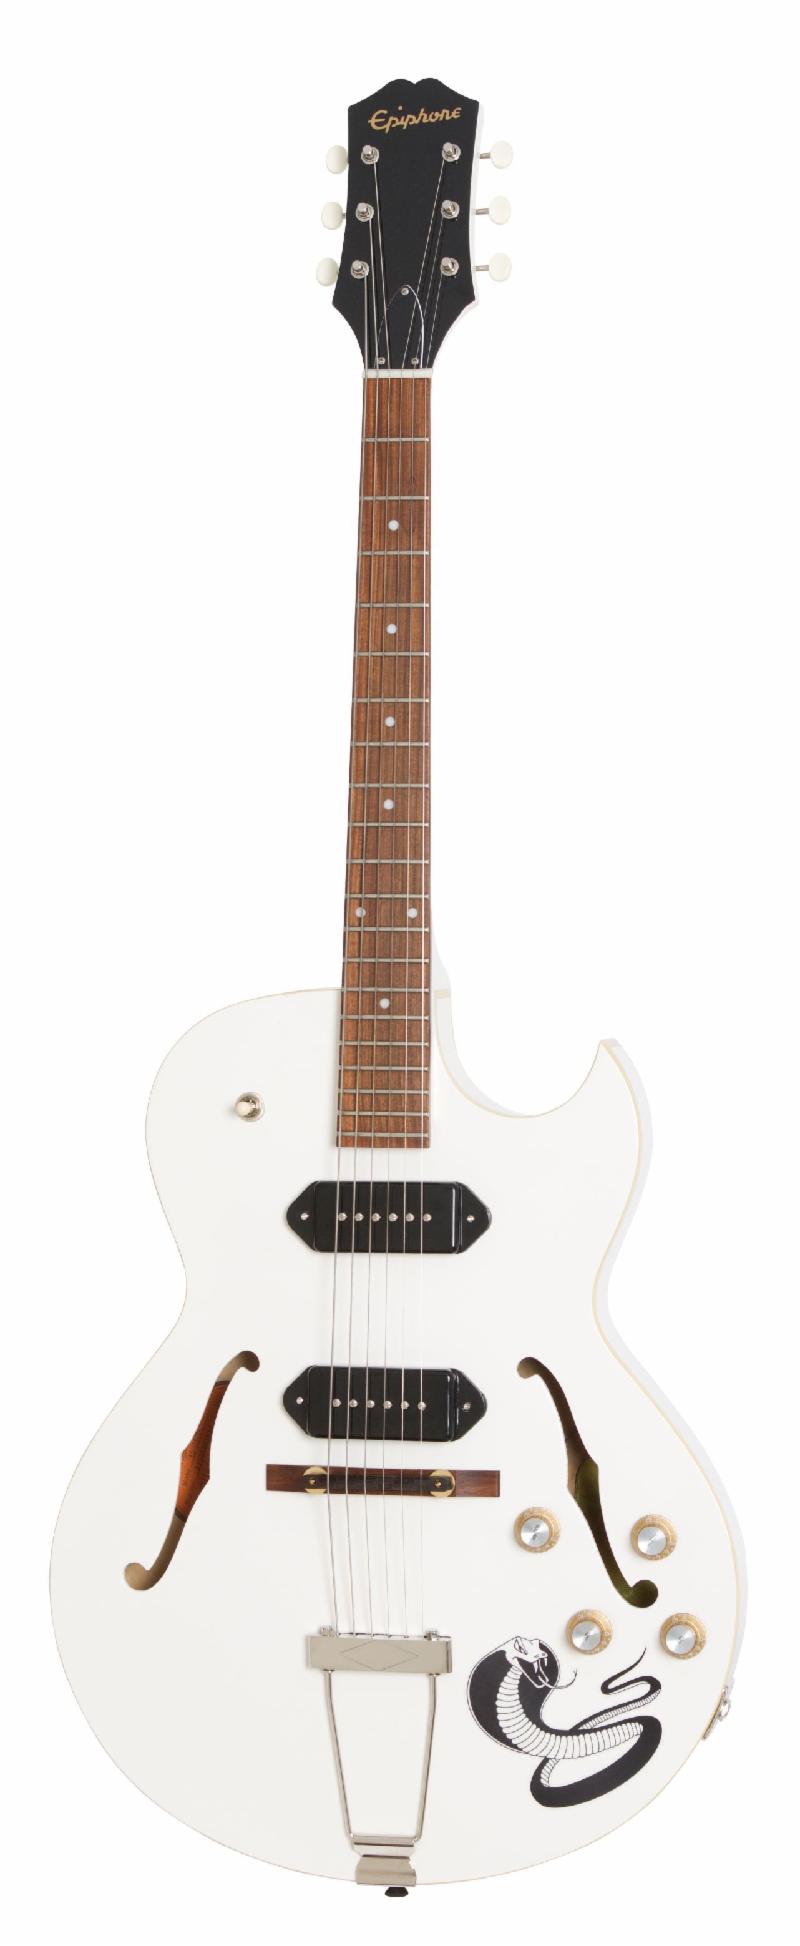 Epiphone-Ltd. Ed. George Thorogood White Fang ES-125 TDC Outfit-Announced; Good To Be Bad Tour-45 Years Of Rock, Continues June 22